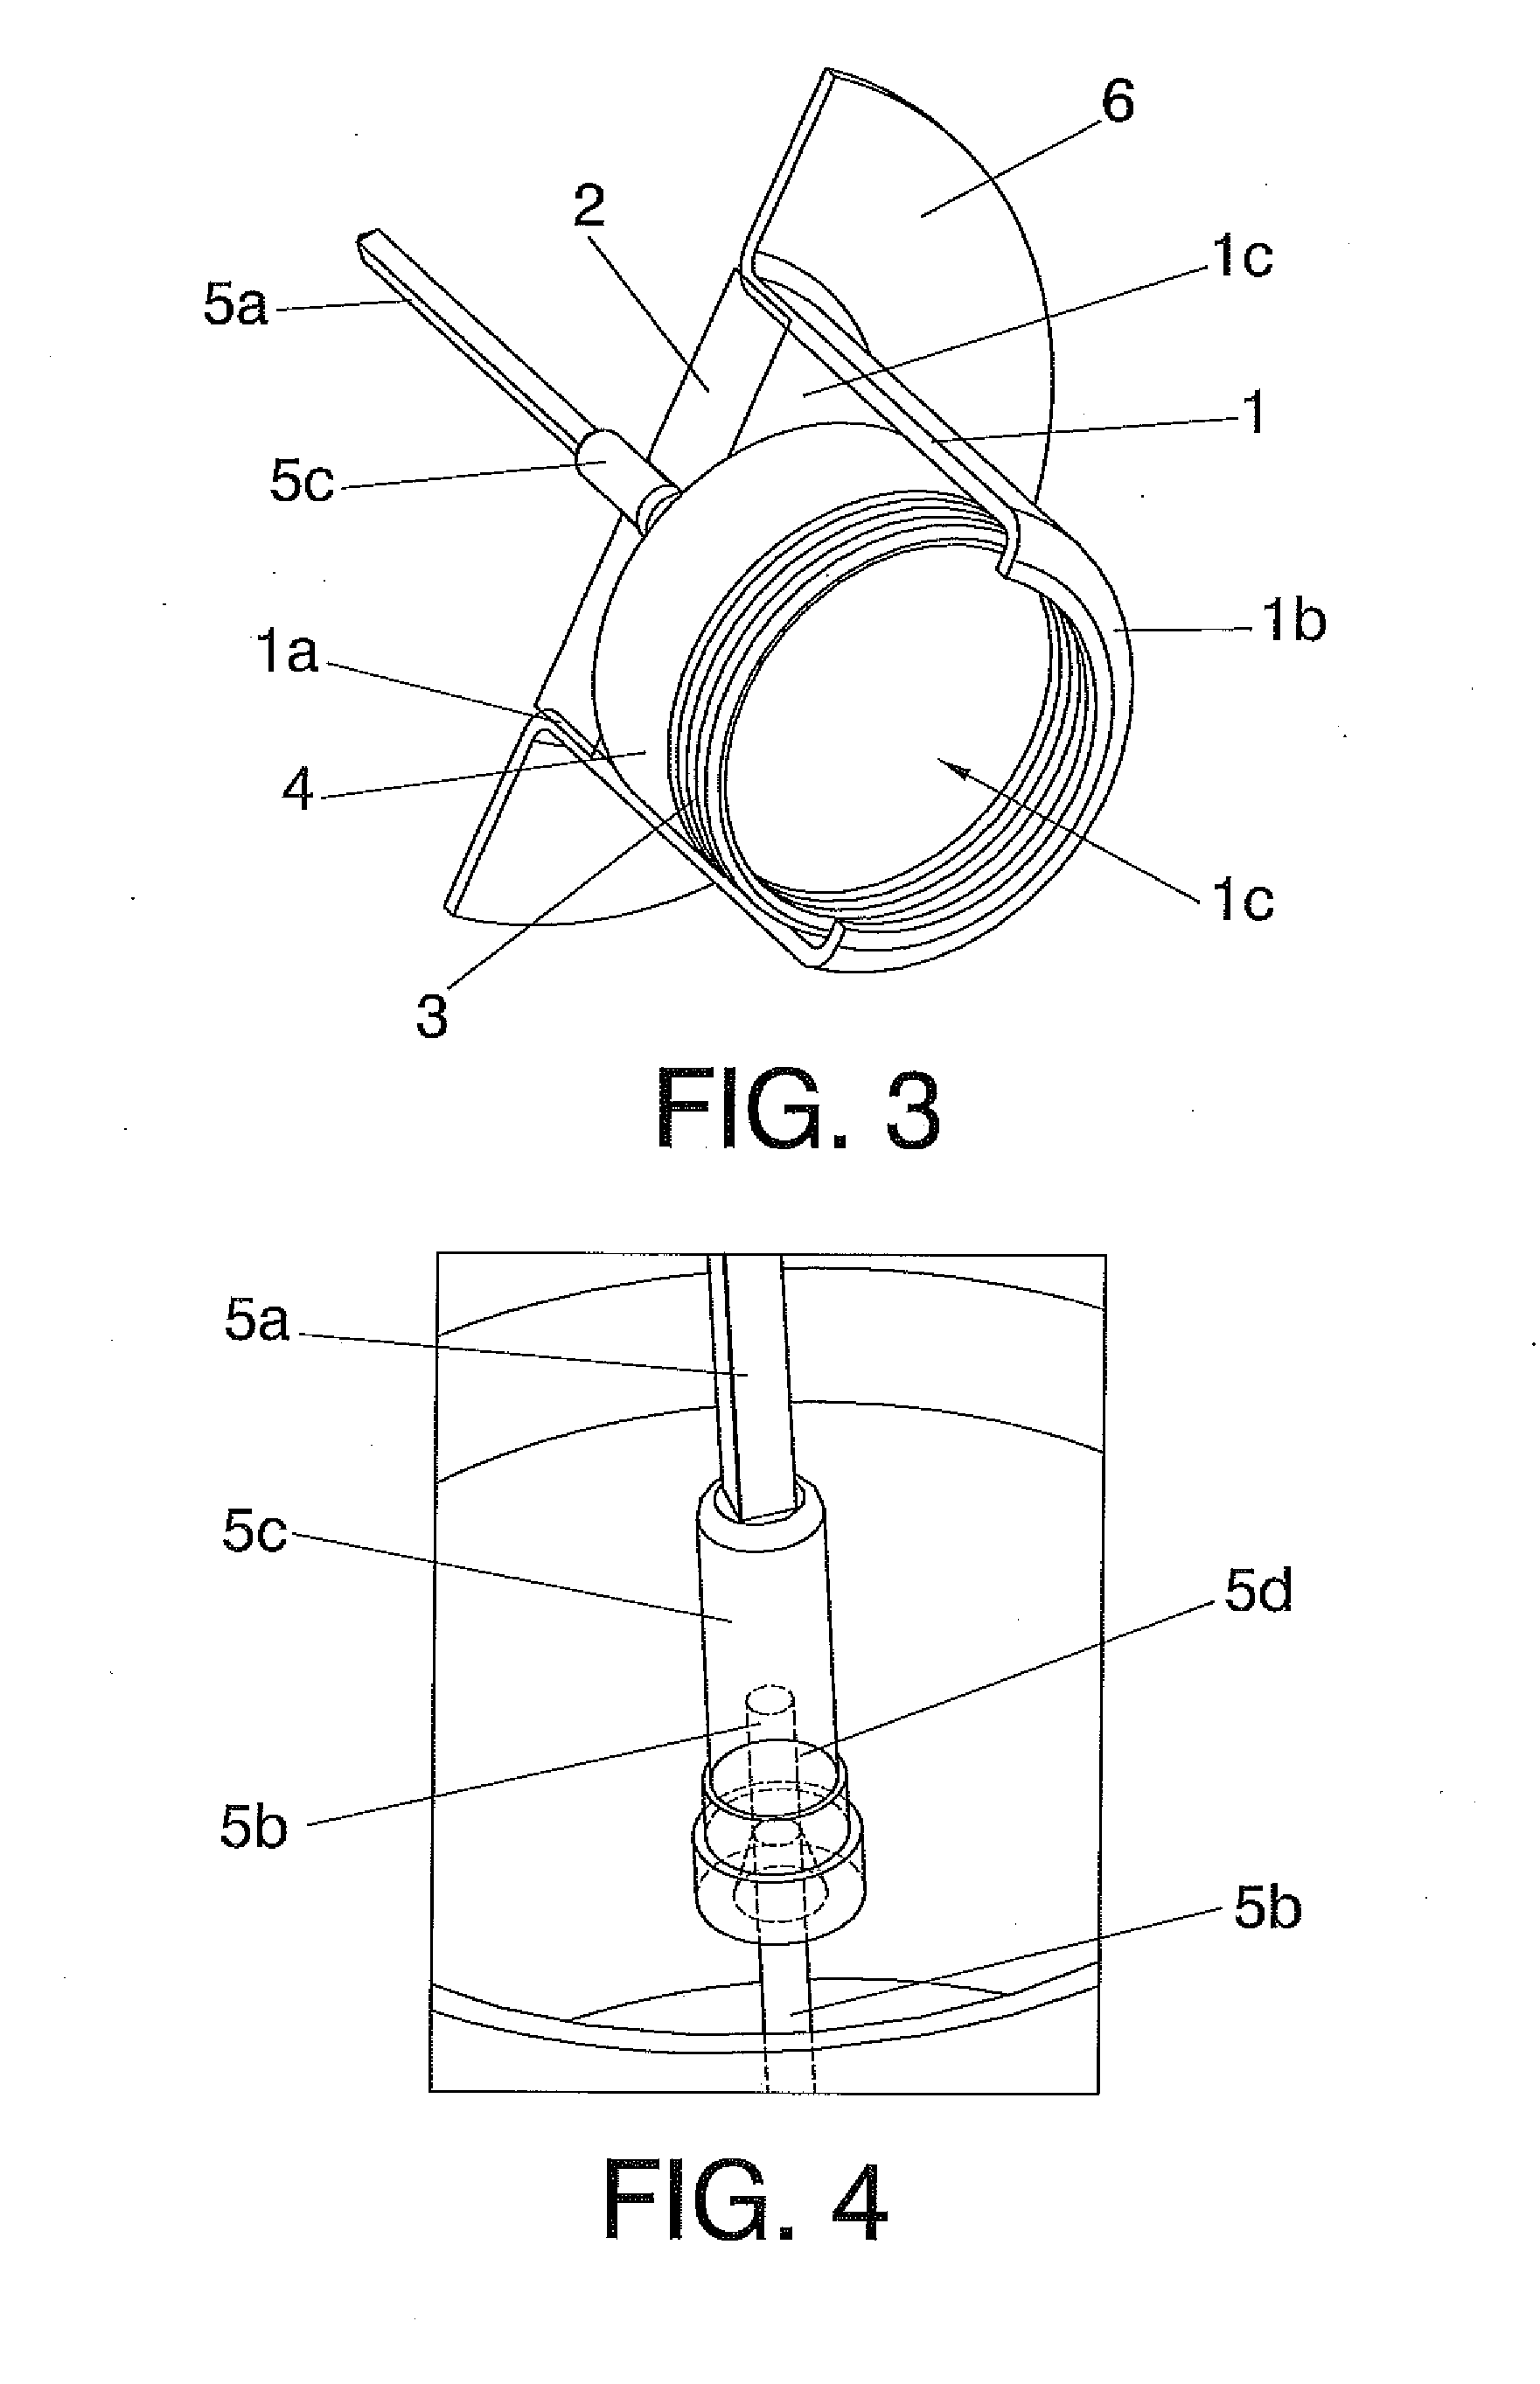 Ignition device for exothermic welding, mold for exothermic welding for the ignition device, and apparatus for exothermic welding comprising such a mold and such an ignition device